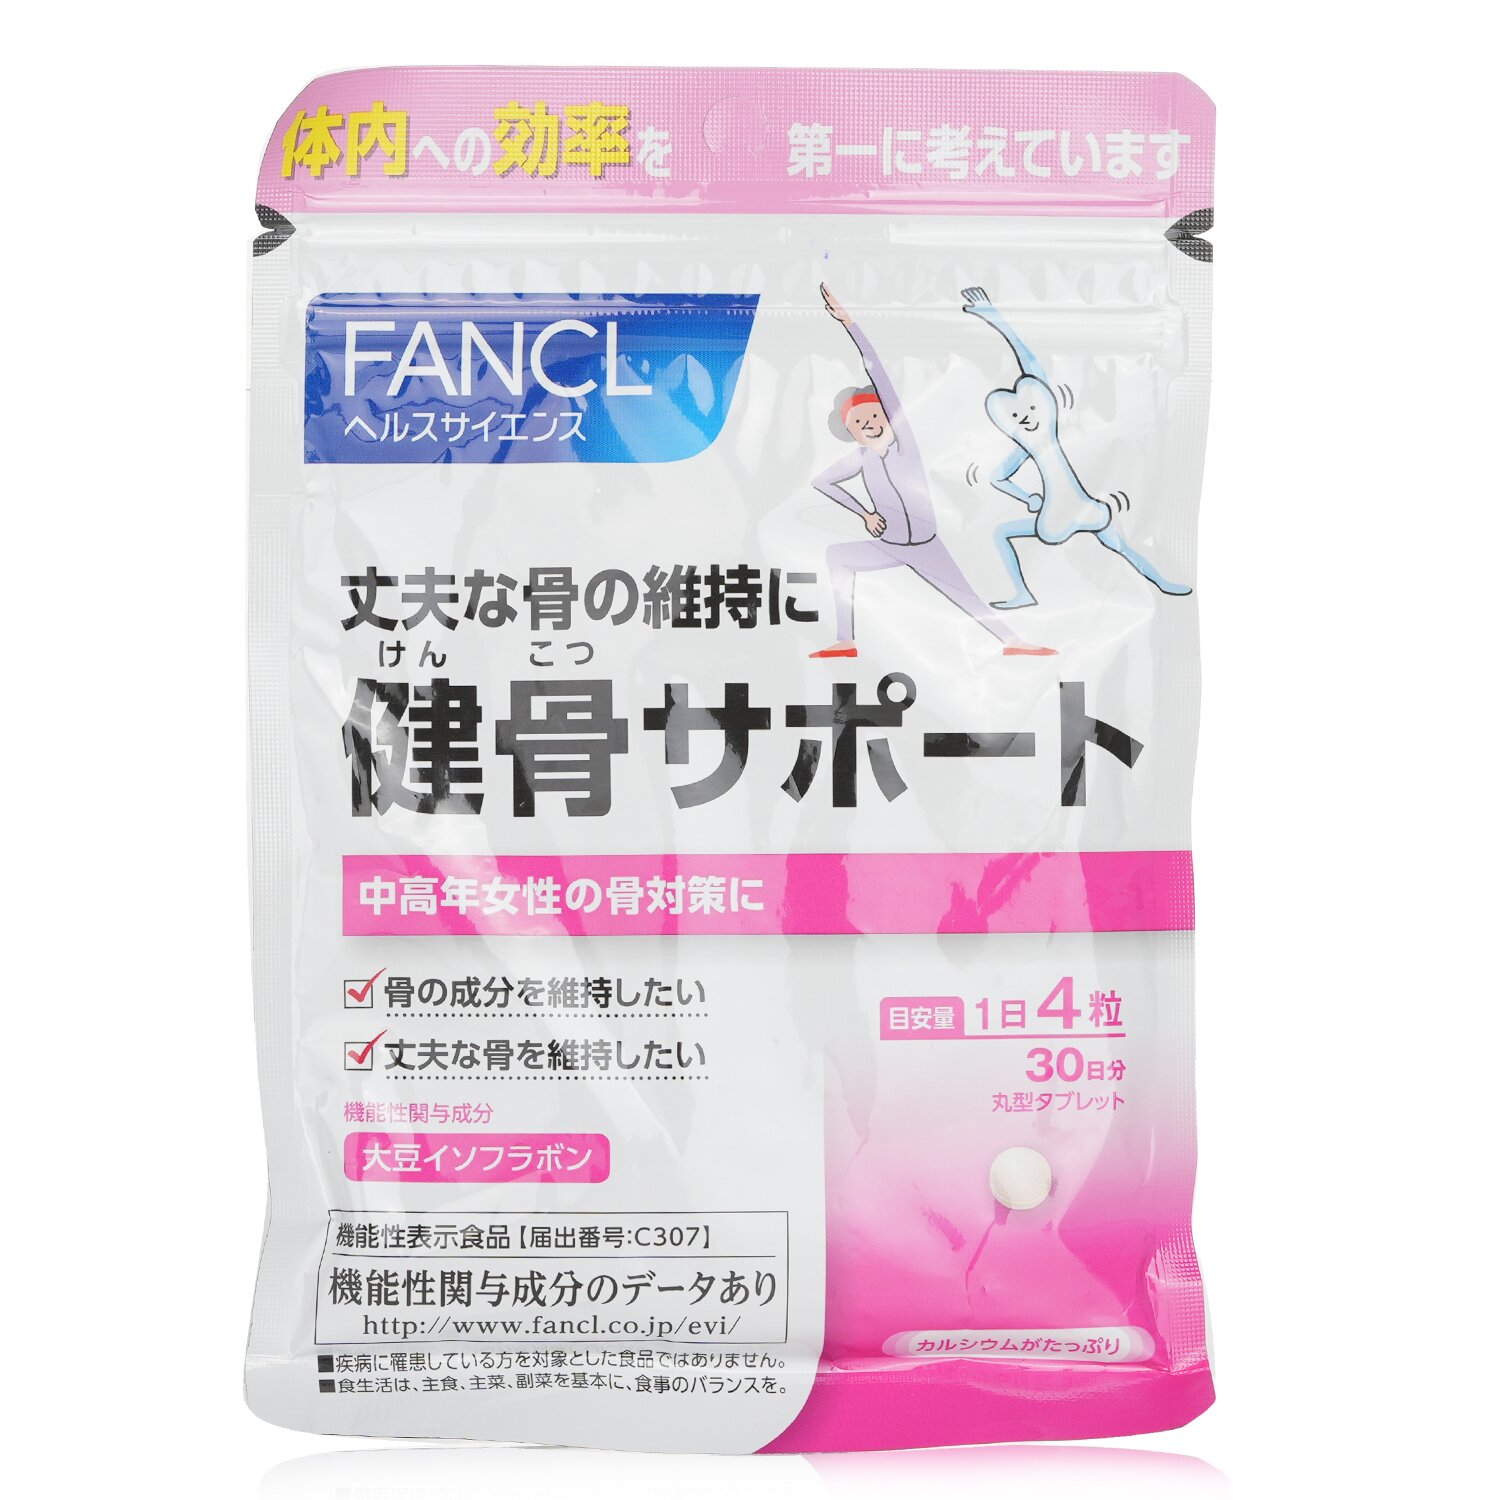 Fancl Healthy Bone Nutrition 120 Tablets In 30 Days [Parallel Import Good] 120 tablets